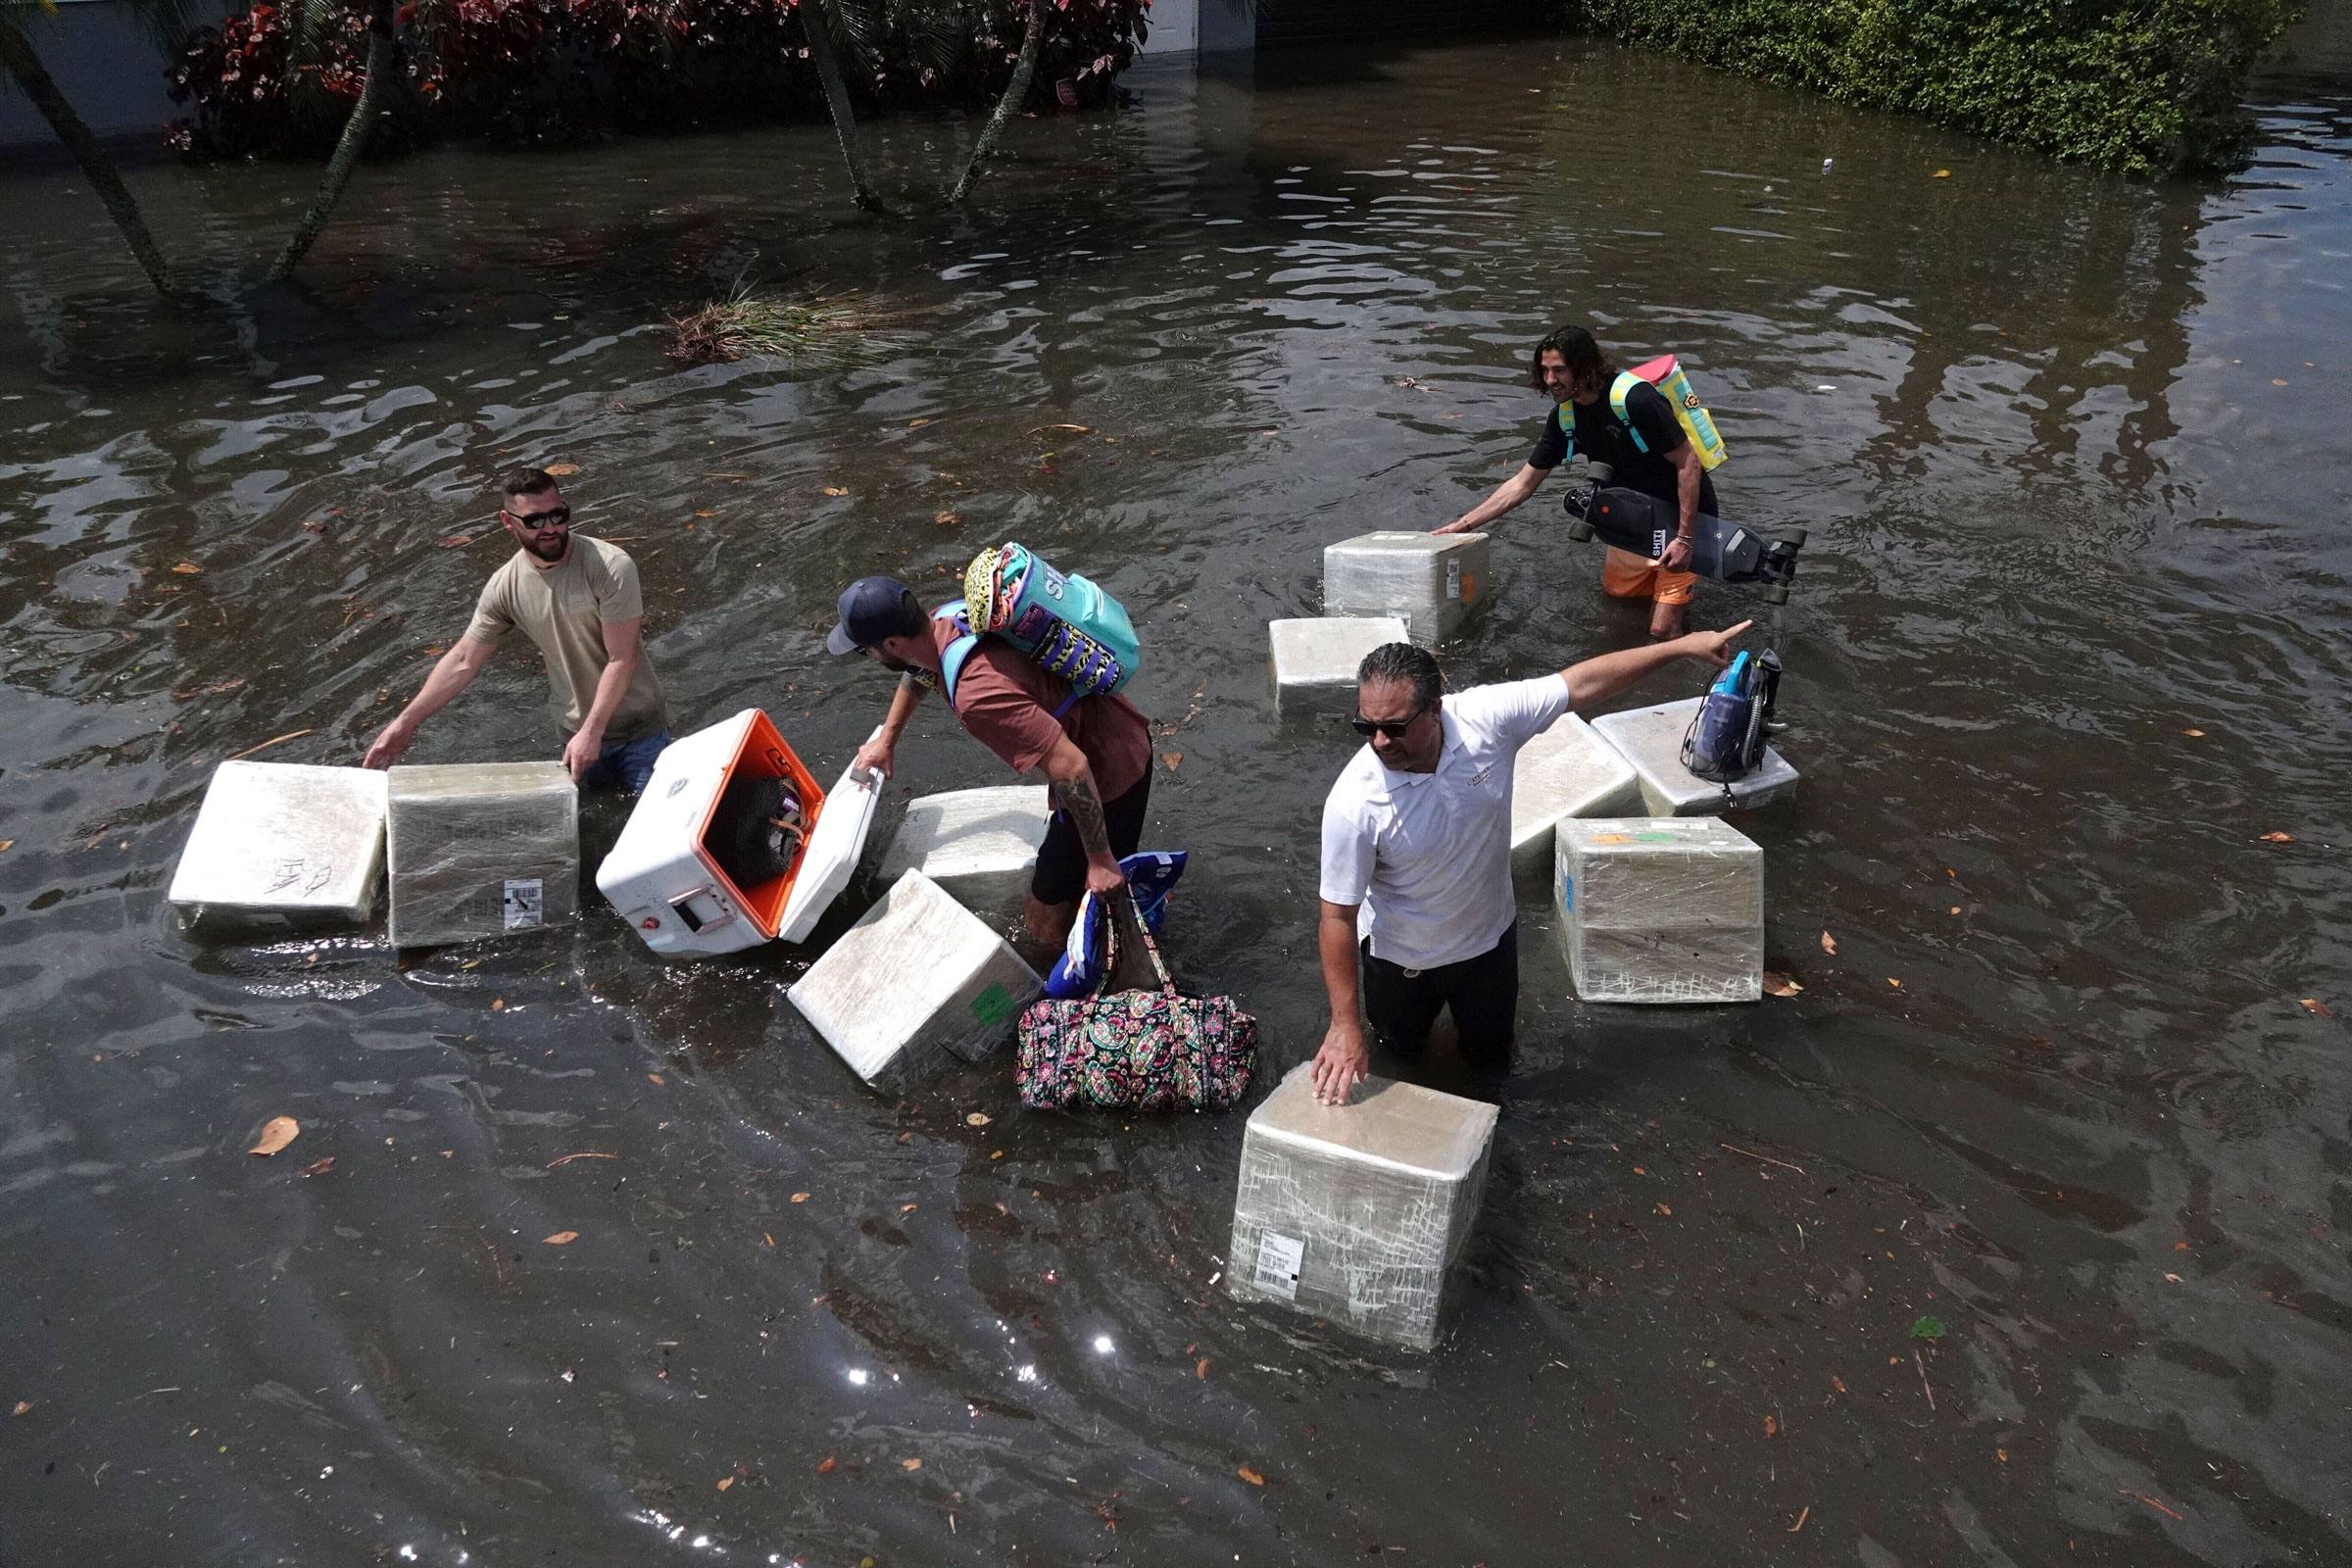 People try to save valuables as they wade through flood waters in the Edgewood neighborhood of Fort Lauderdale, Fla., on April 13, 2023. (Joe Cavaretta—South Florida Sun-Sentinel/AP)